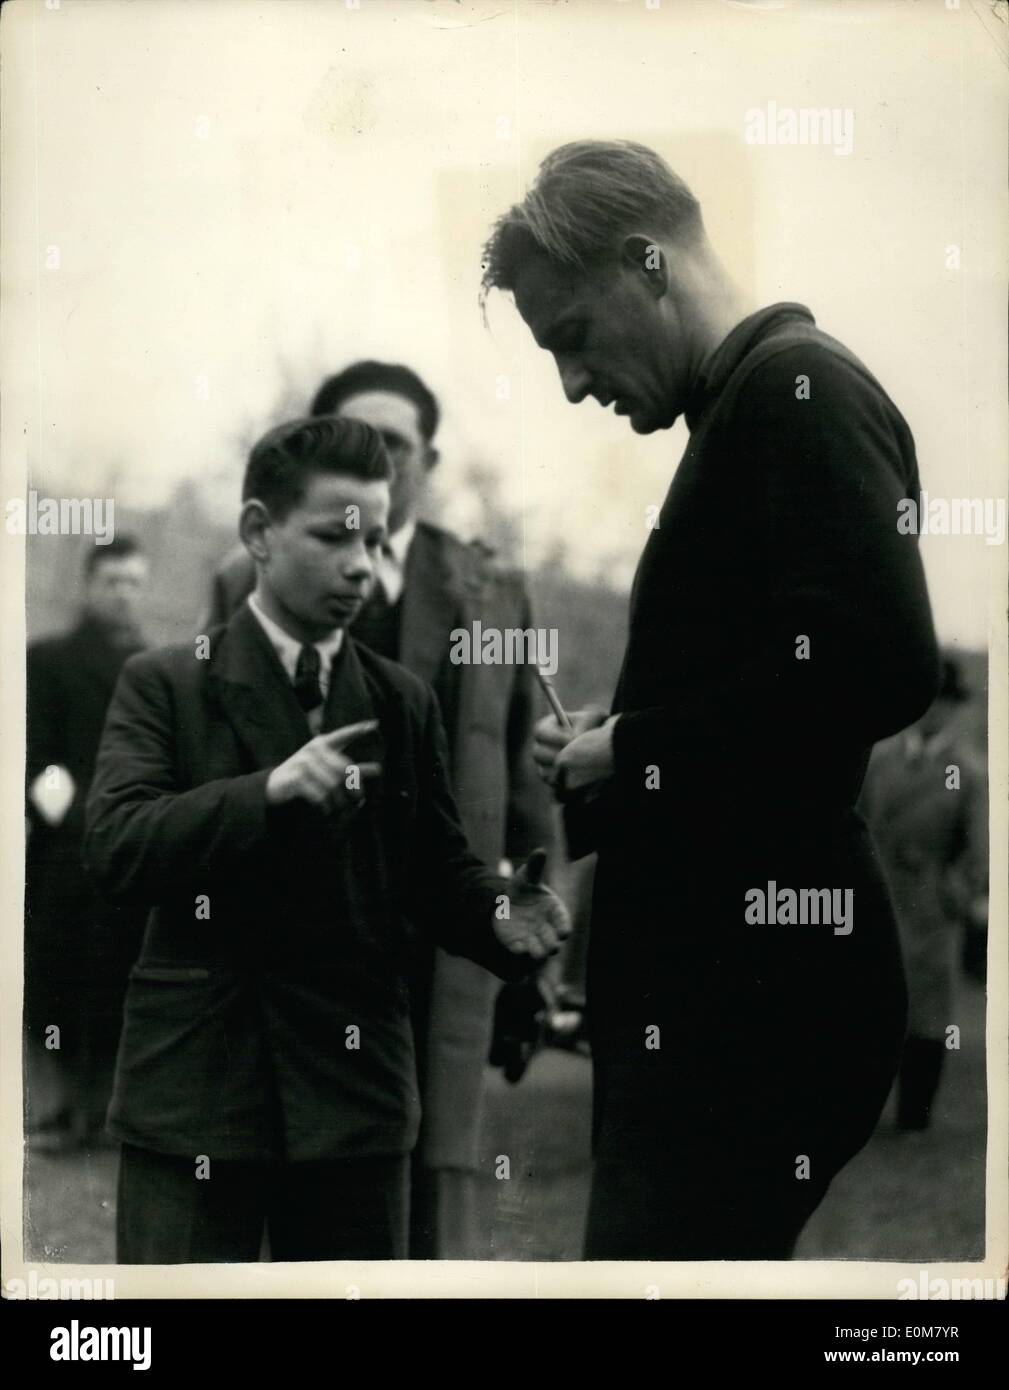 Nov. 24, 1953 - 24-11-53 Hungarian footballers in training. Lorant signs autographs. Members of the Hungarian Football Team which meets England at Wembley tomorrow were to be seen training at the Fulham Ground this morning. Keystone Photo Shows: Lorant, a member of the Hungarian team signs autographs at the Fulham ground this morning. Stock Photo